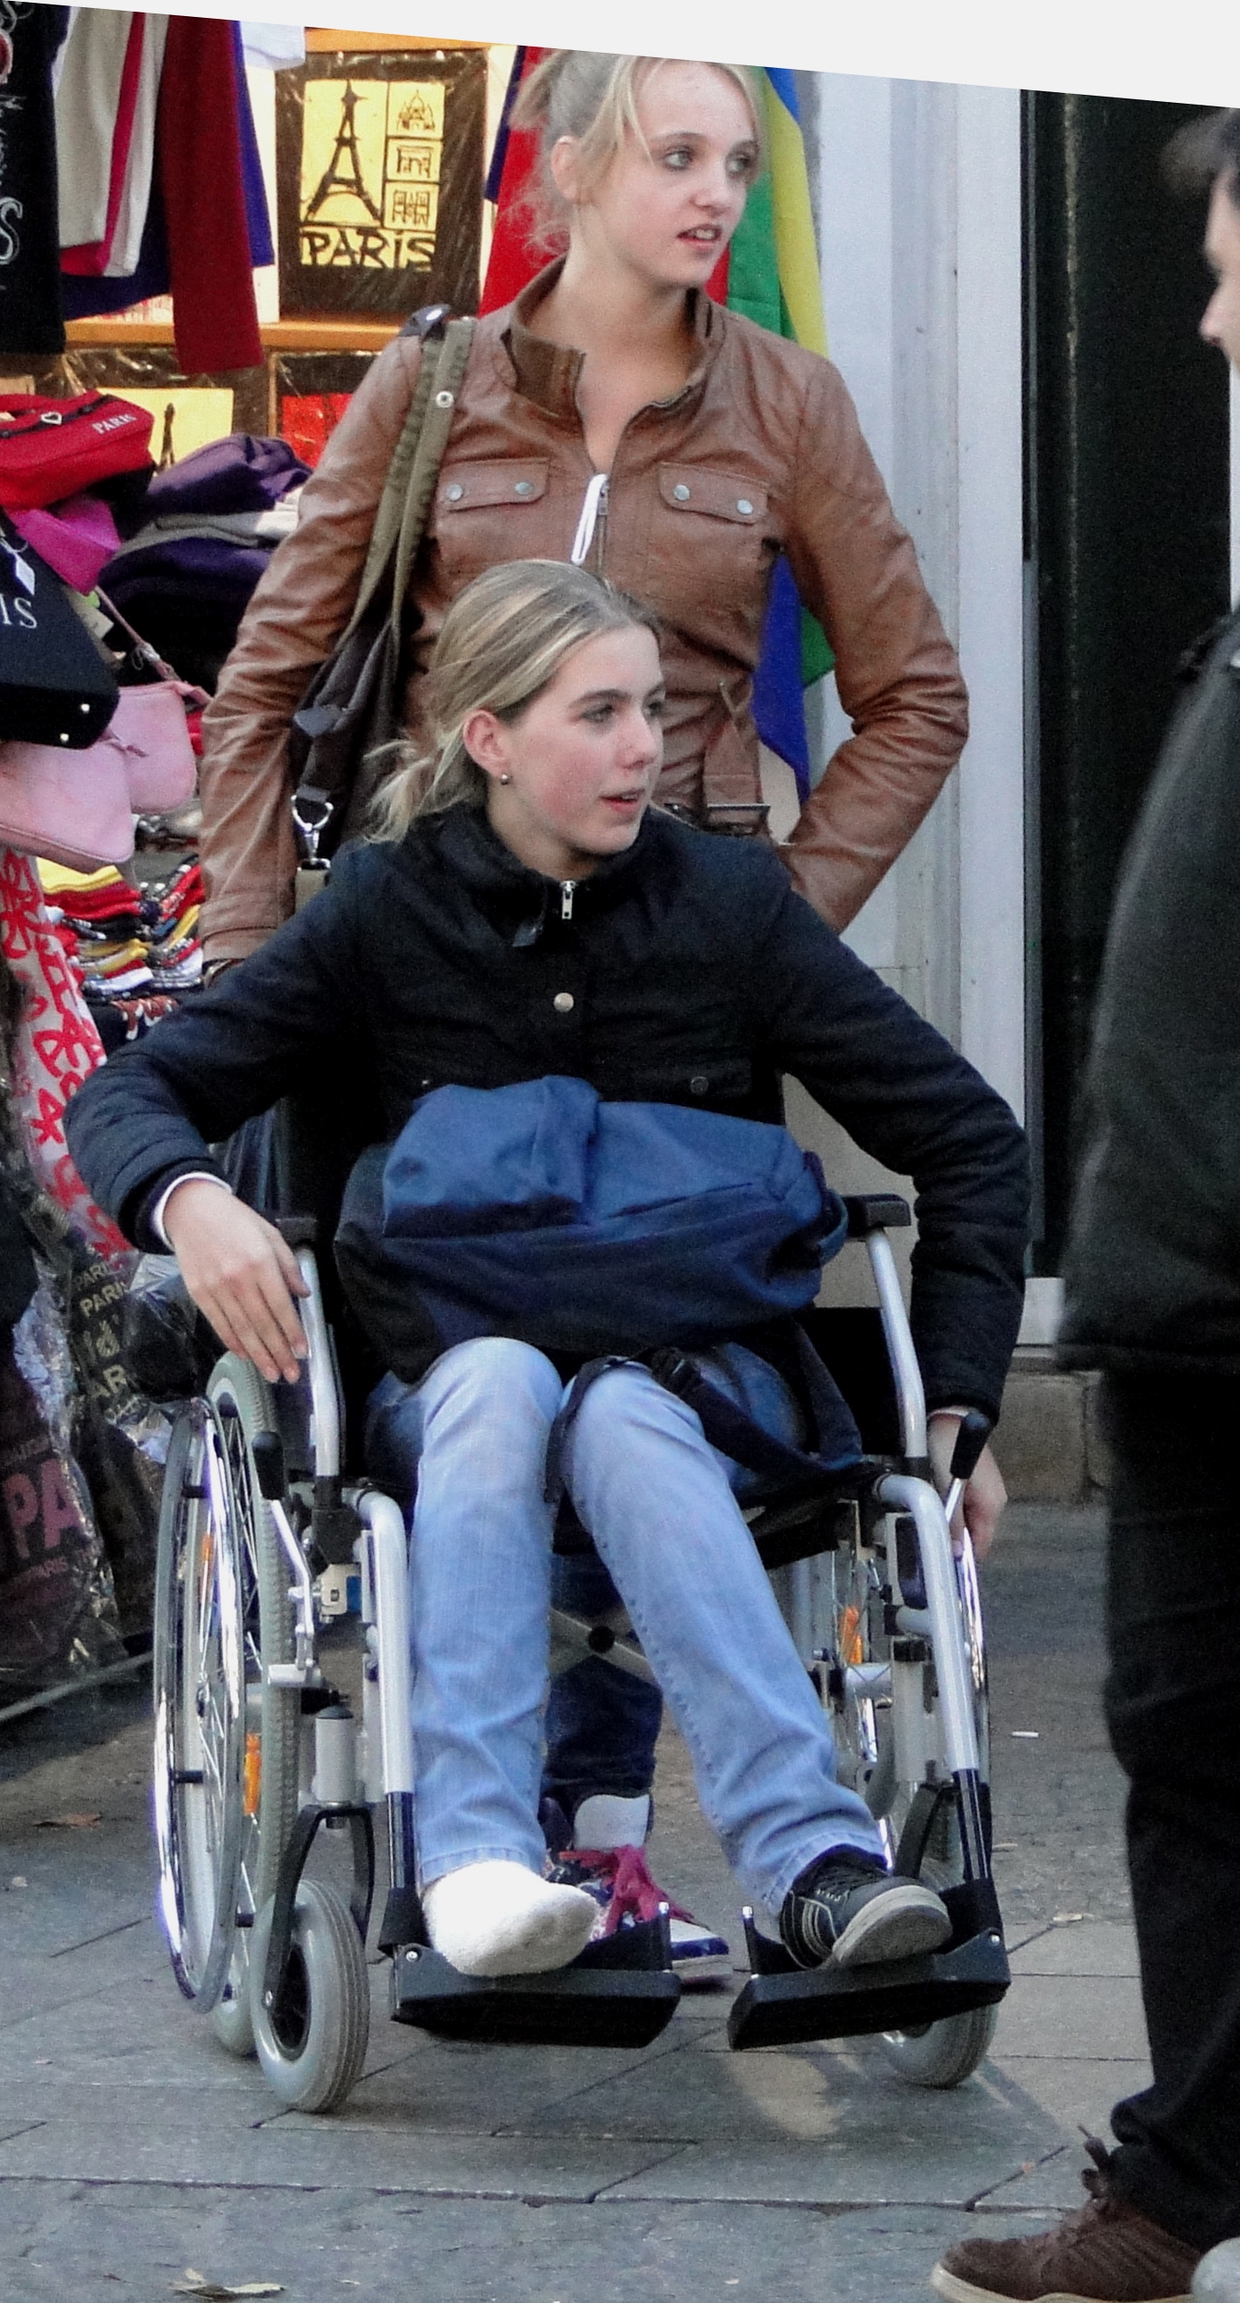 Woman with sprain and wheelchair